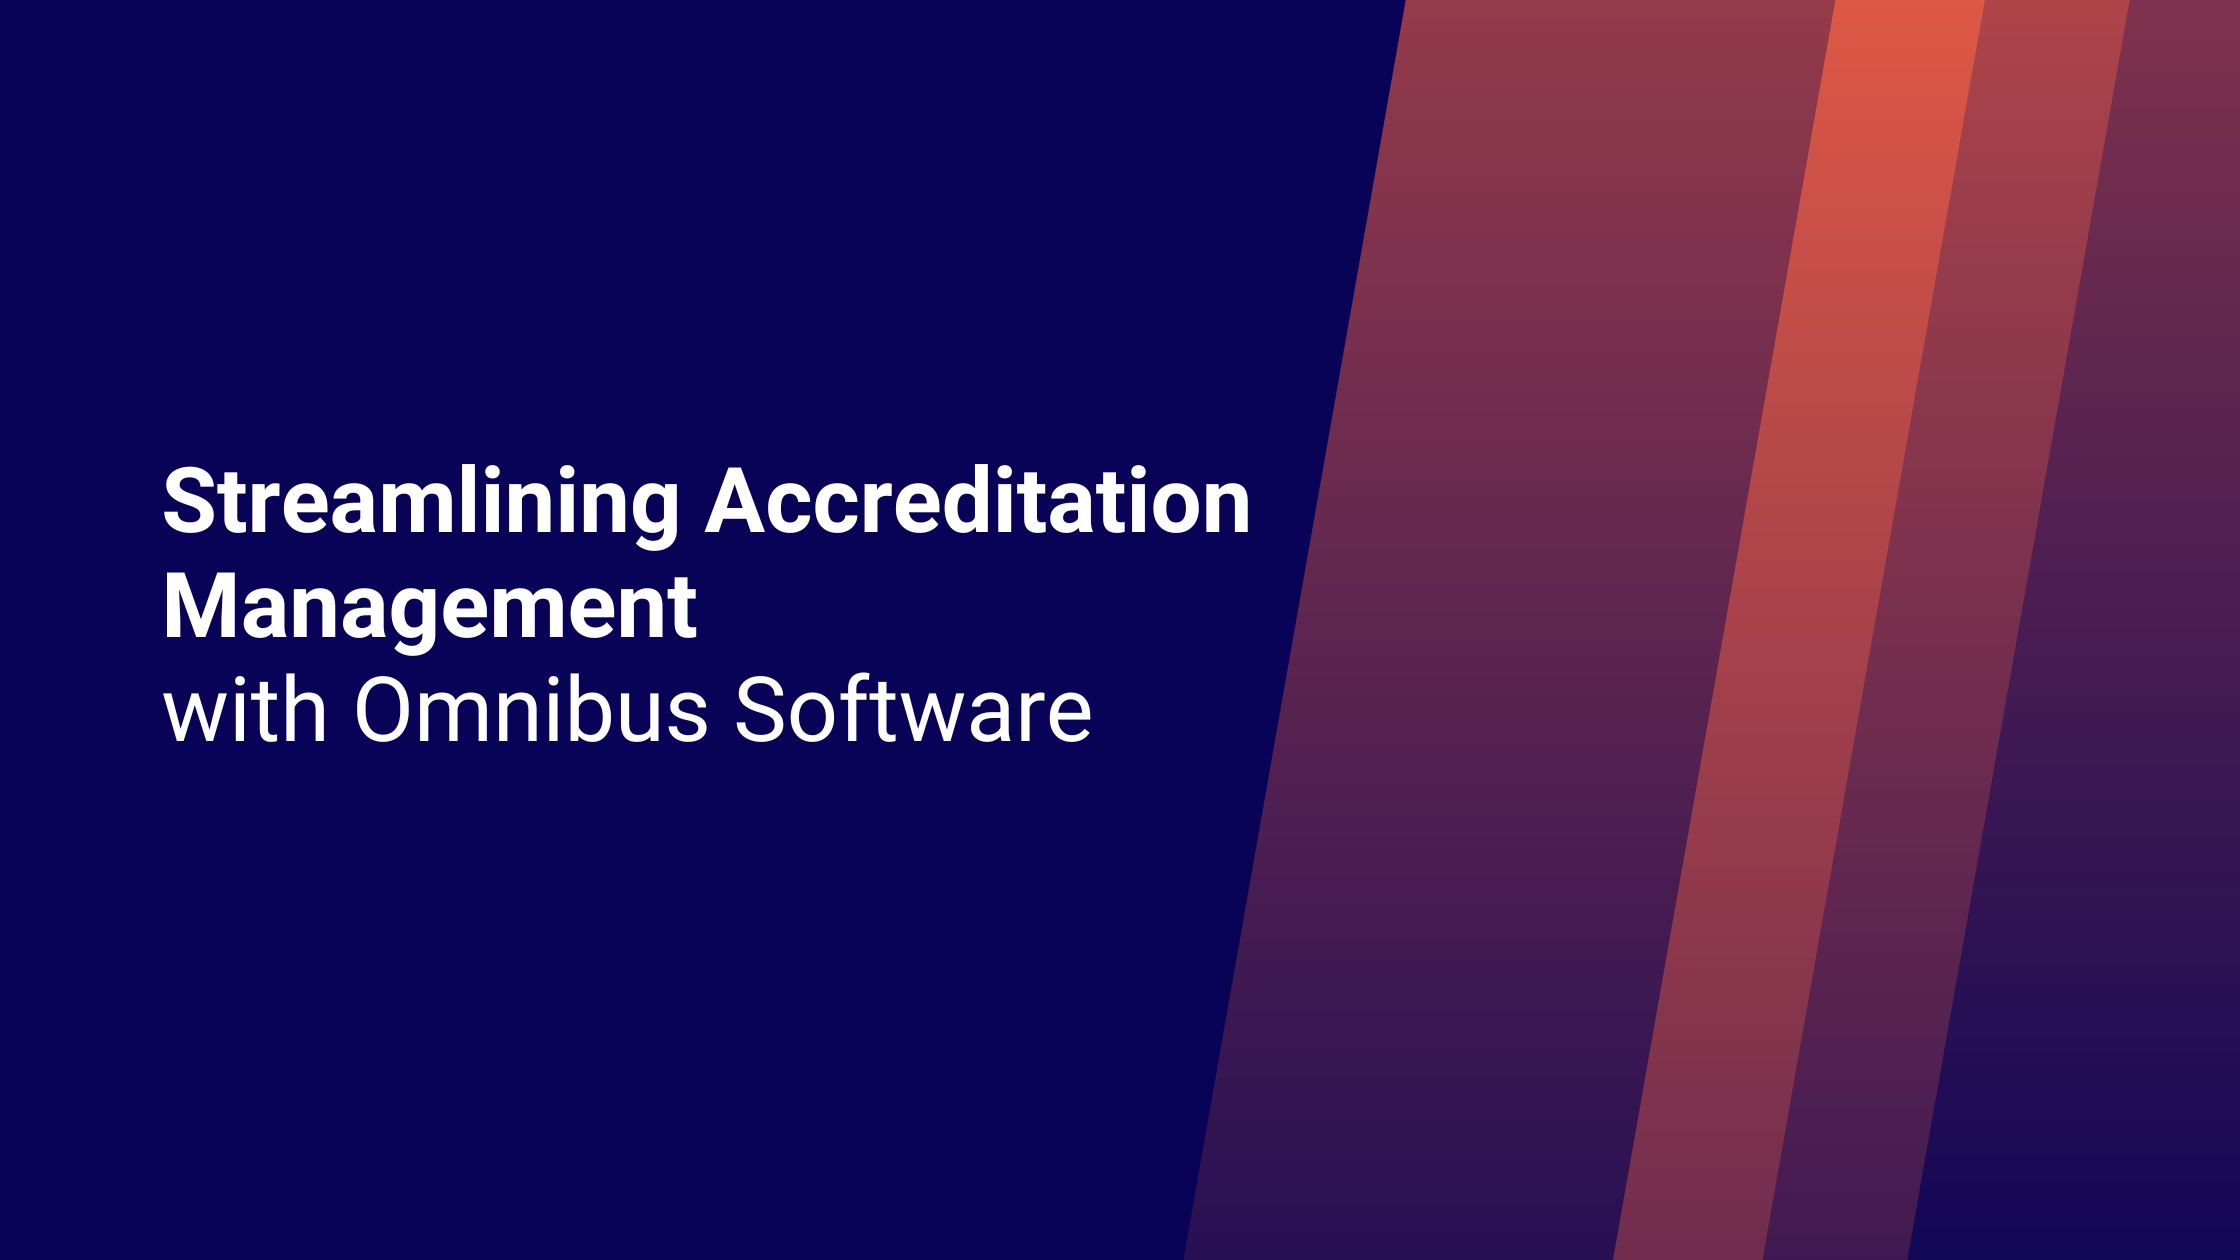 Streamlining Accreditation Management for Colleges and Universities with Omnibus Software